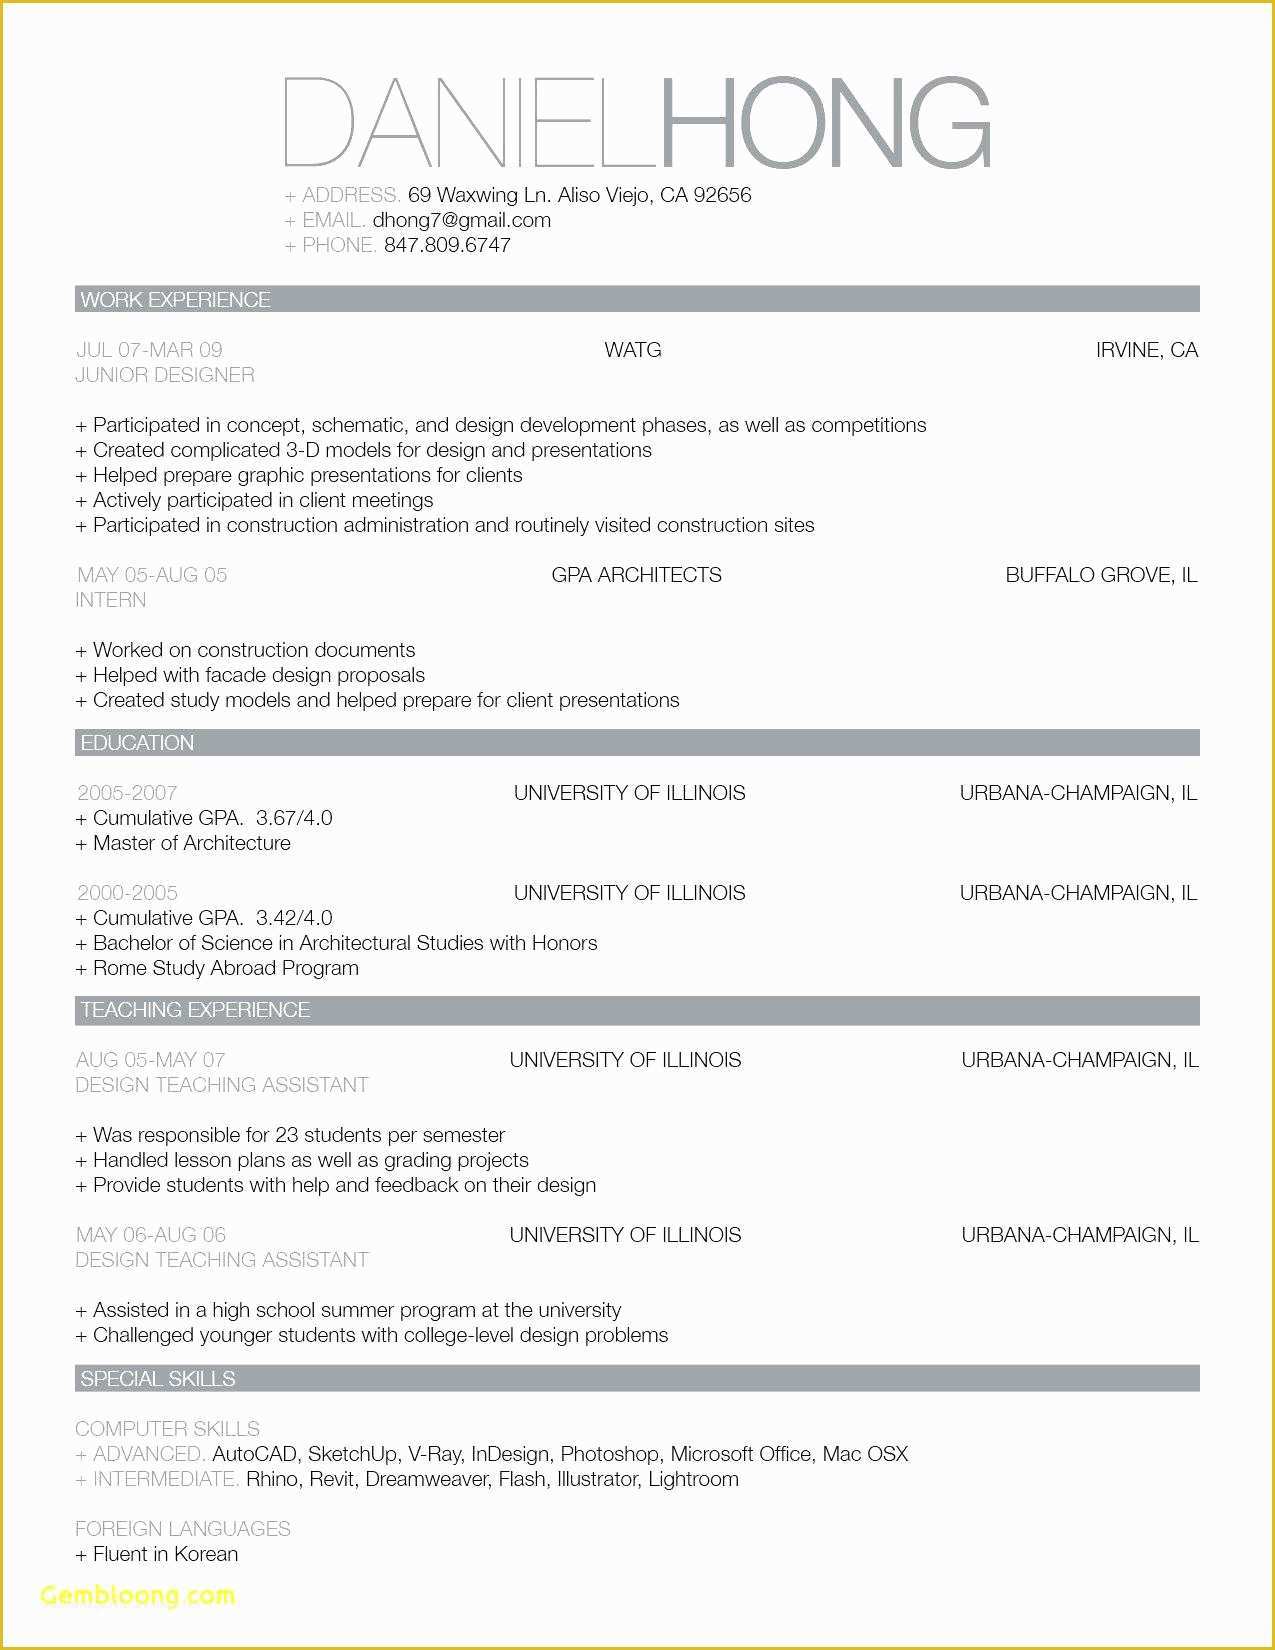 Free Current Resume Templates Of Interesting Design Current Resume format Template Free